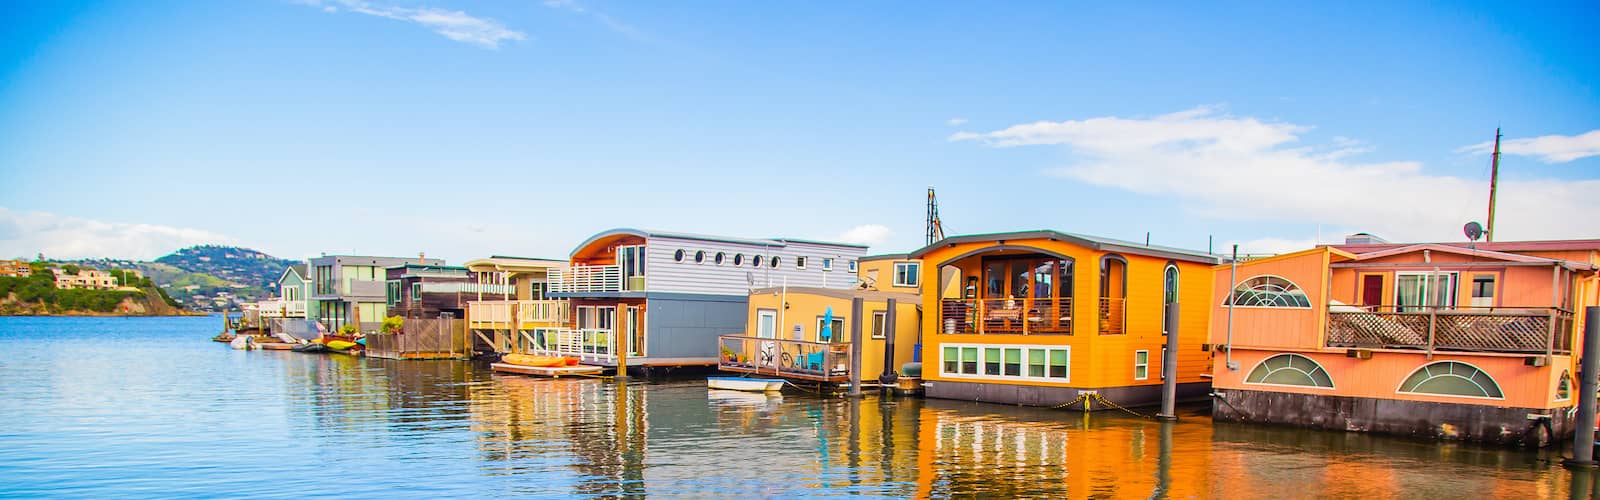 Houseboats floating on water, likely in a residential area.